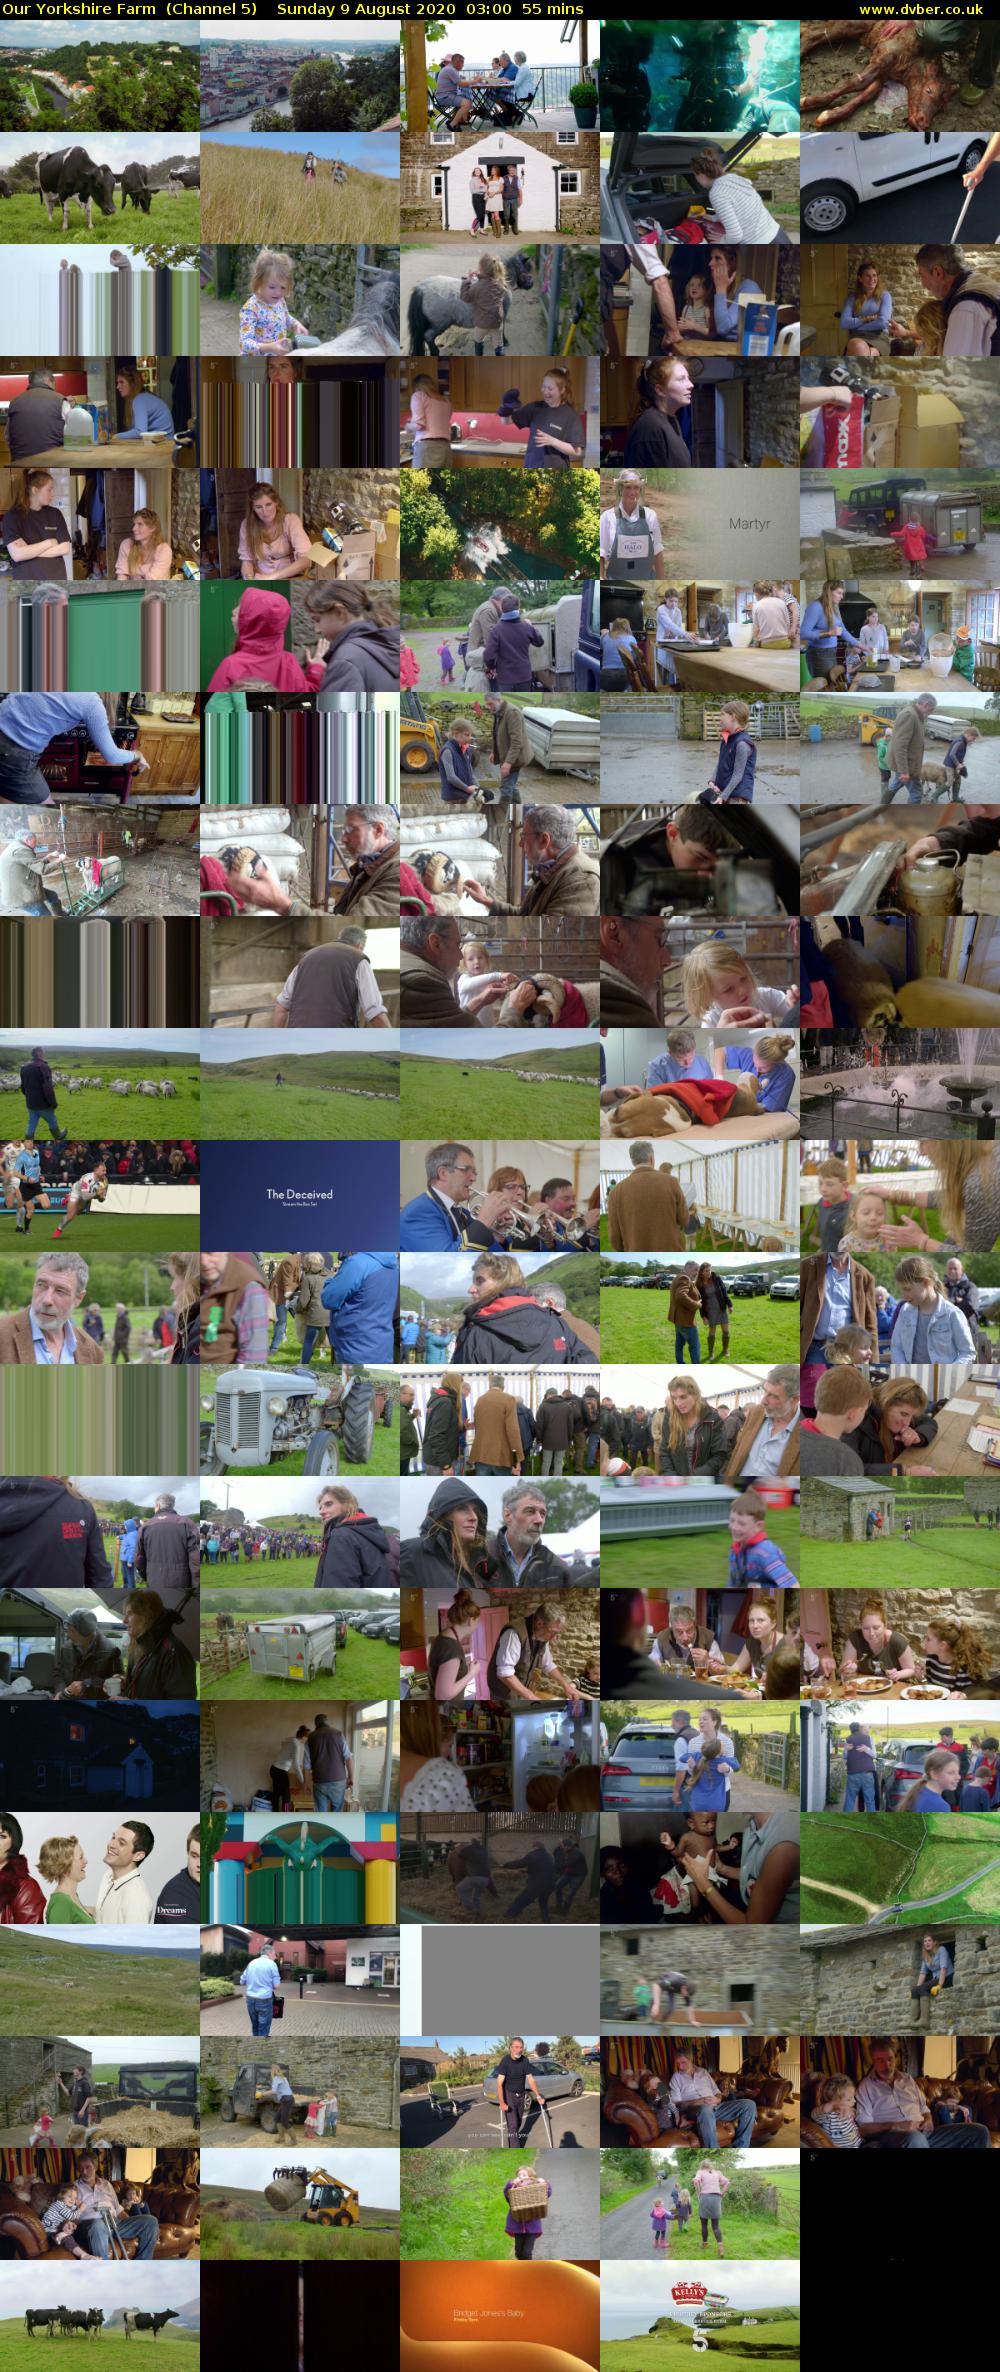 Our Yorkshire Farm  (Channel 5) Sunday 9 August 2020 03:00 - 03:55